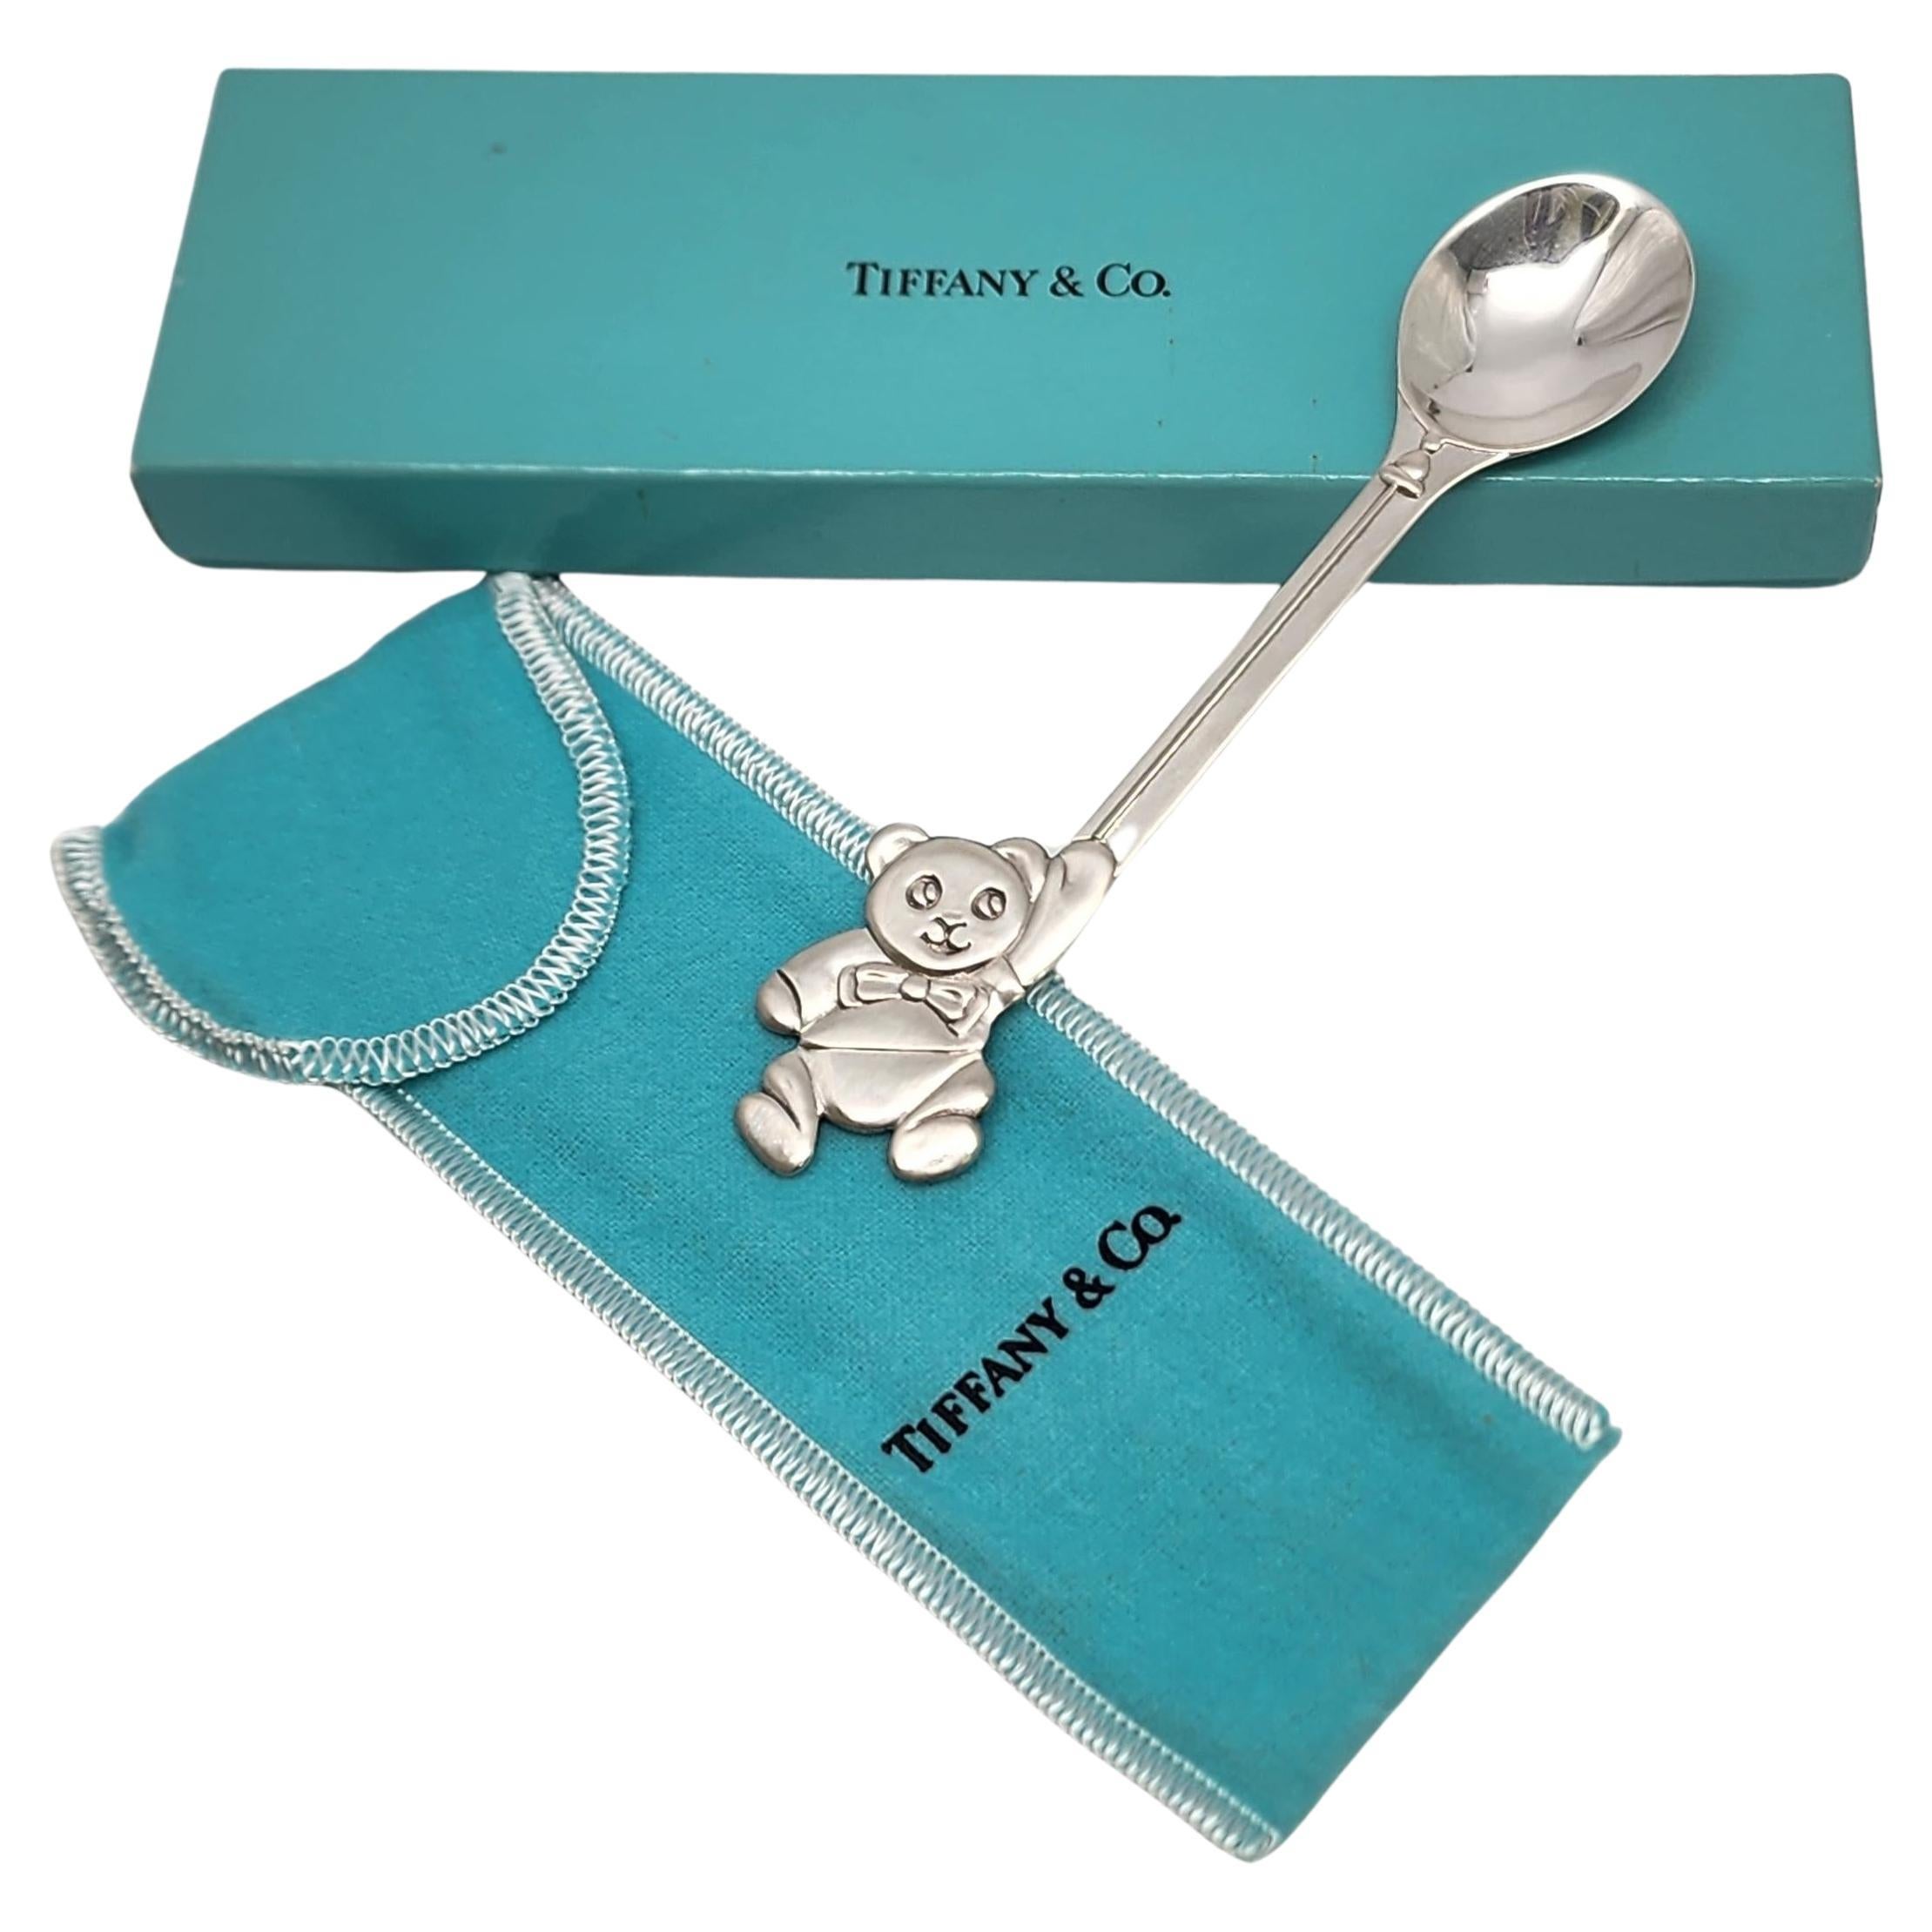 Tiffany & Co Sterling Silver Teddy Bear Baby/Child Spoon w/Box and Pouch #17258 For Sale